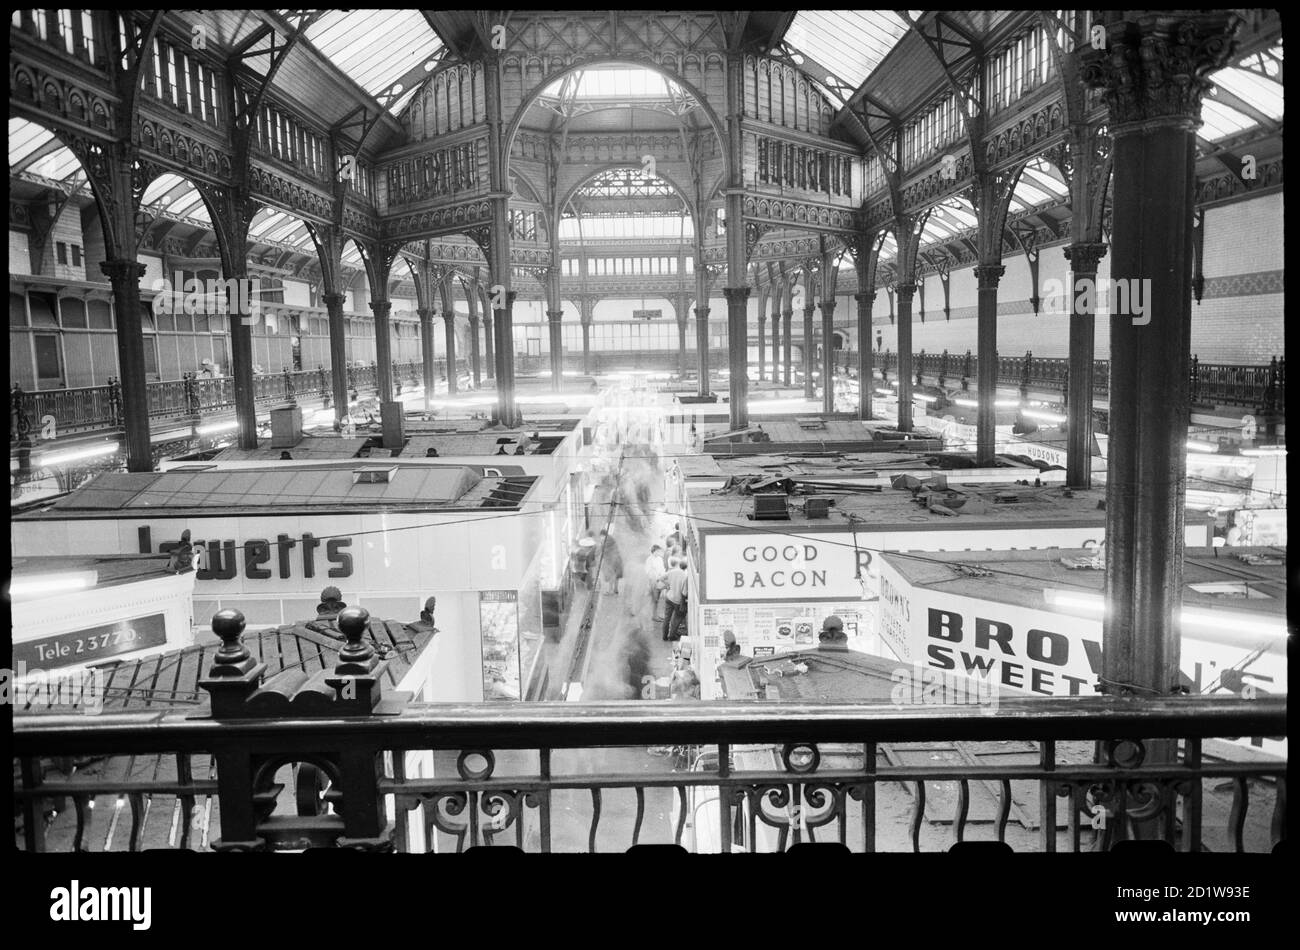 Interior view of City Markets, seen from a balcony on a short side of the hall and looking across the centre of the hall, showing rows of stalls below and the cast iron structure that supports the glazed clearestory and central octagon. Stock Photo